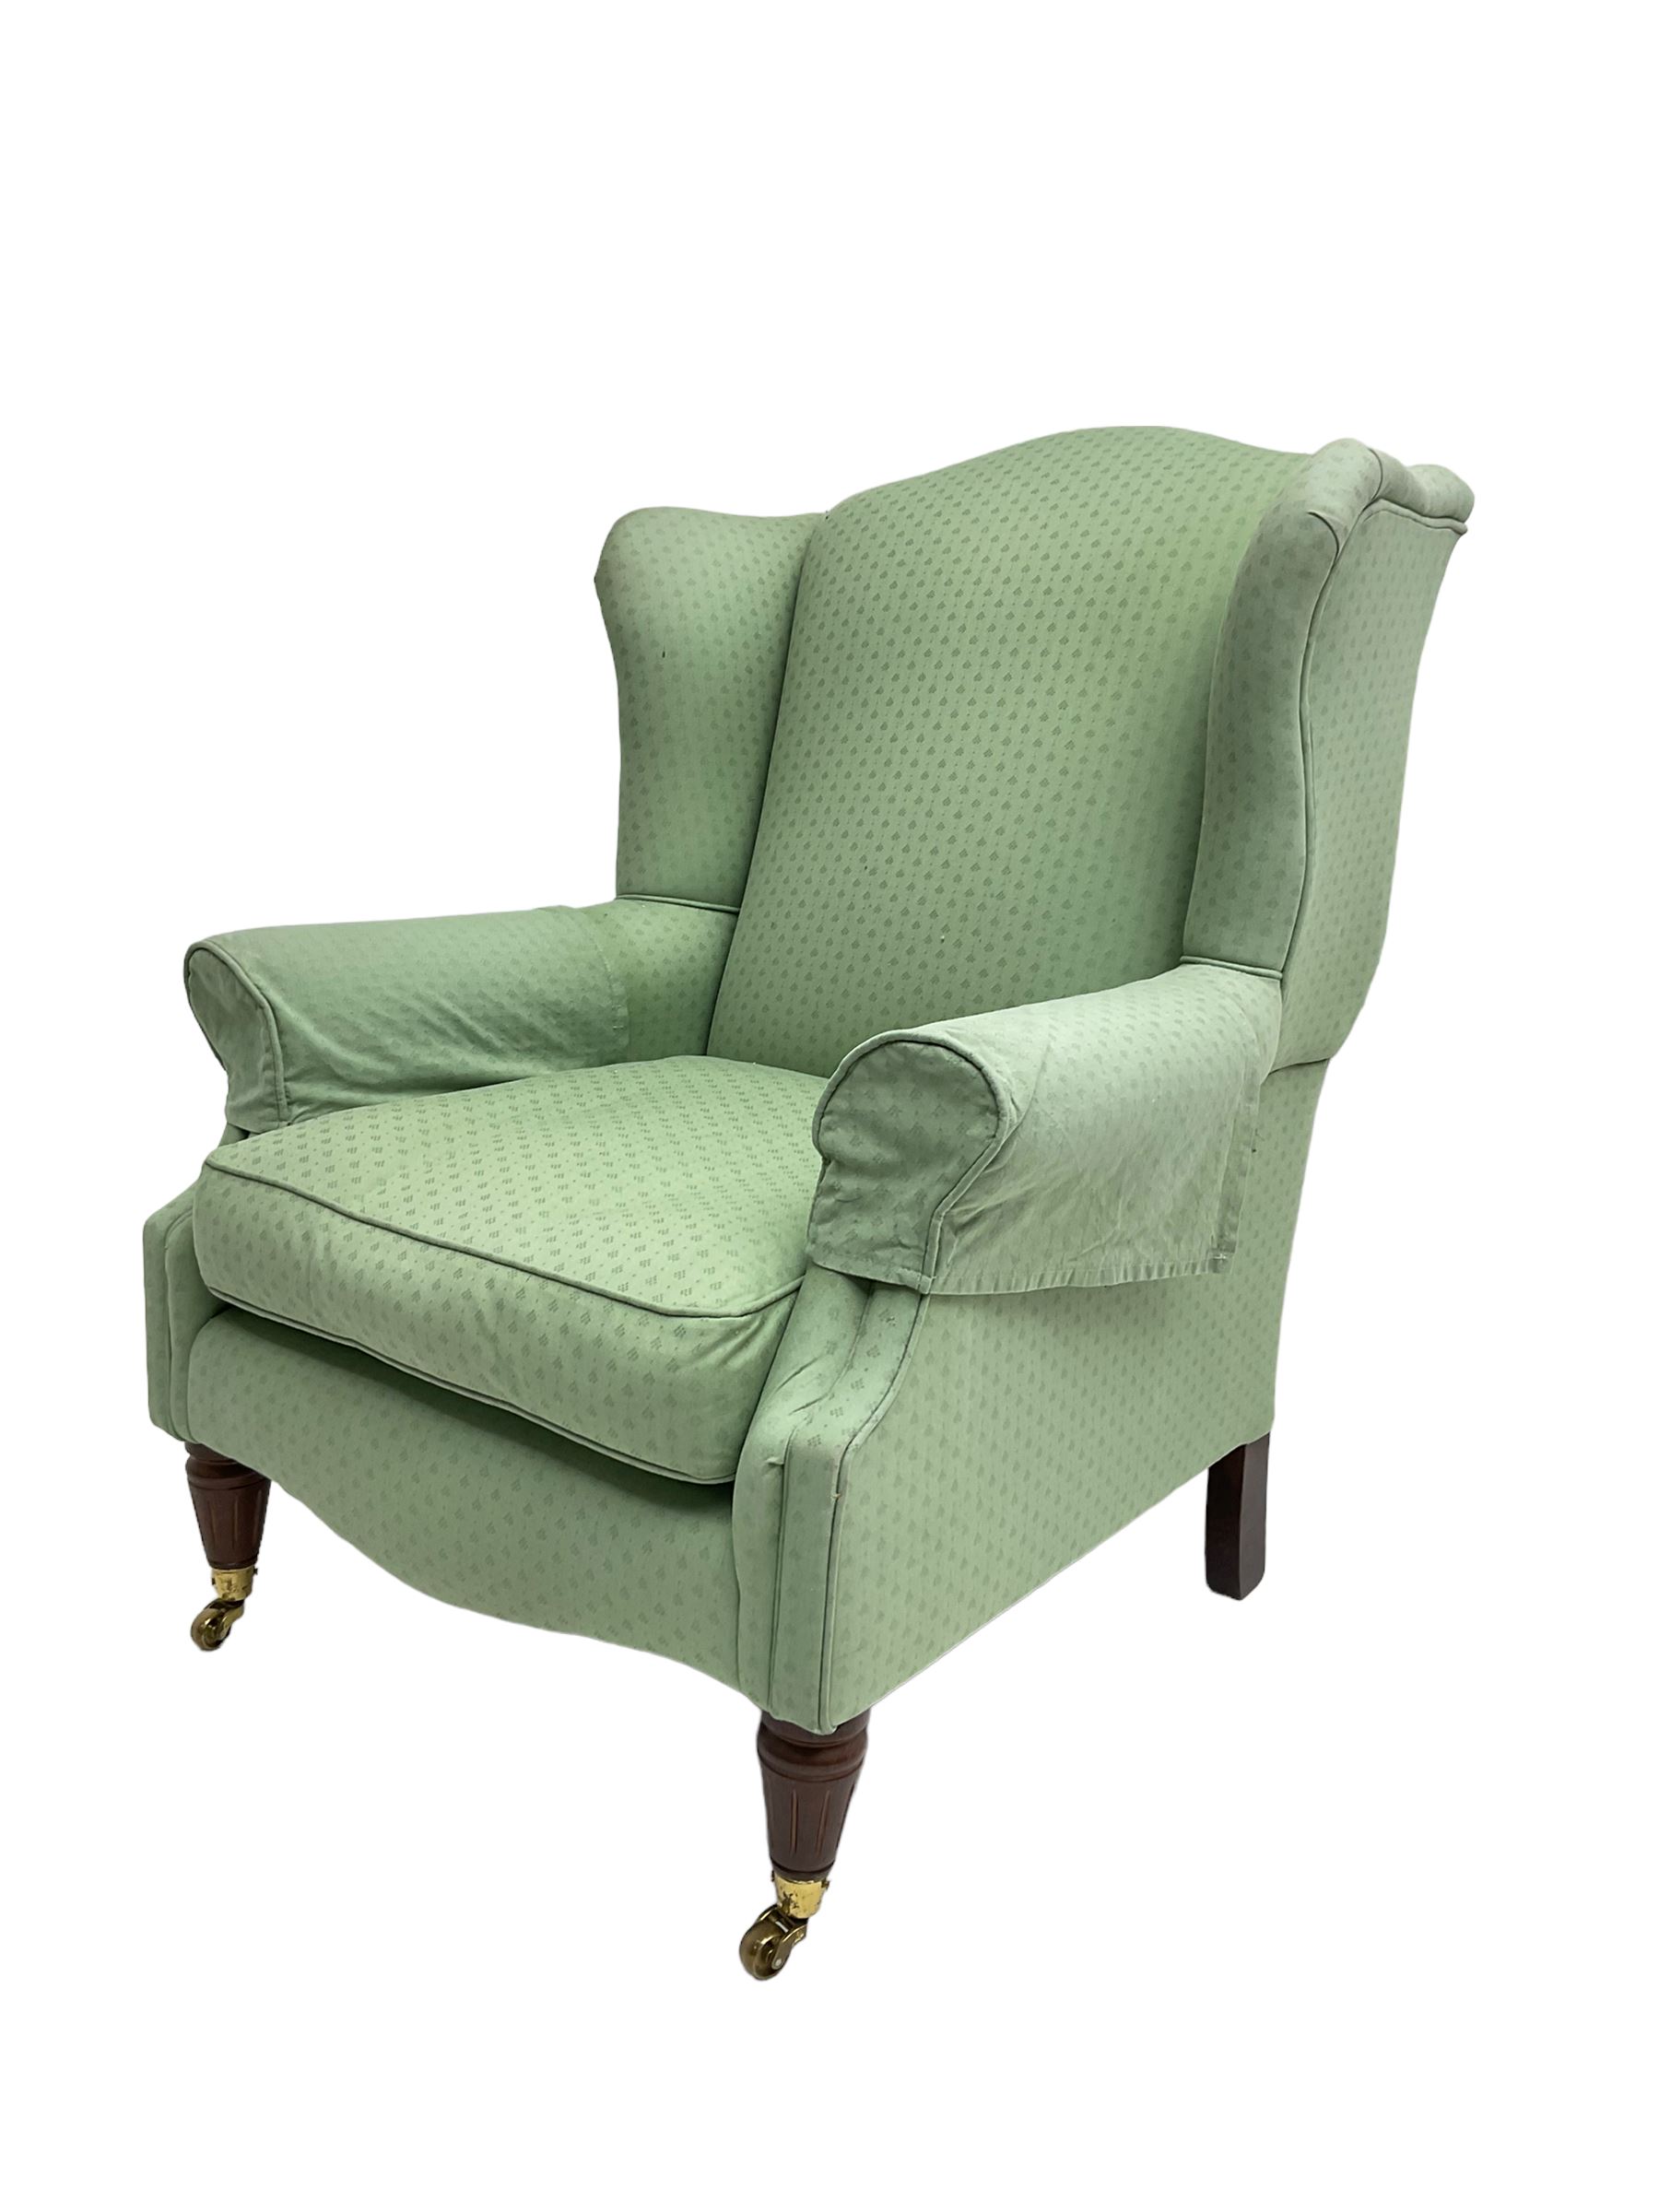 Wingback armchair - Image 6 of 6